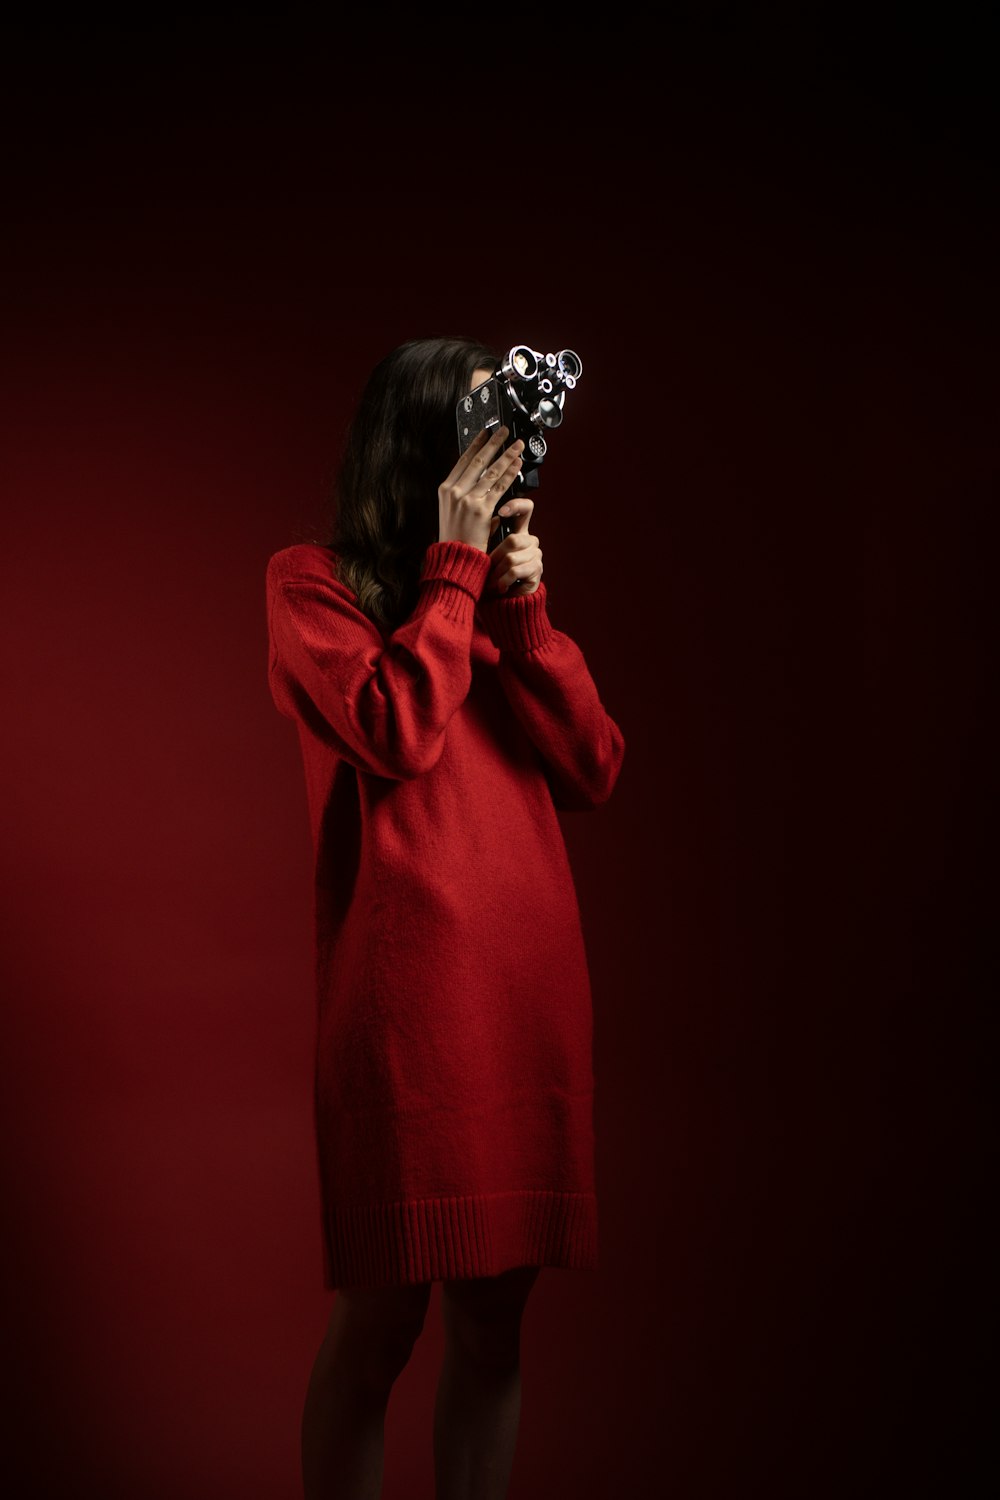 a woman in a red dress holding a camera